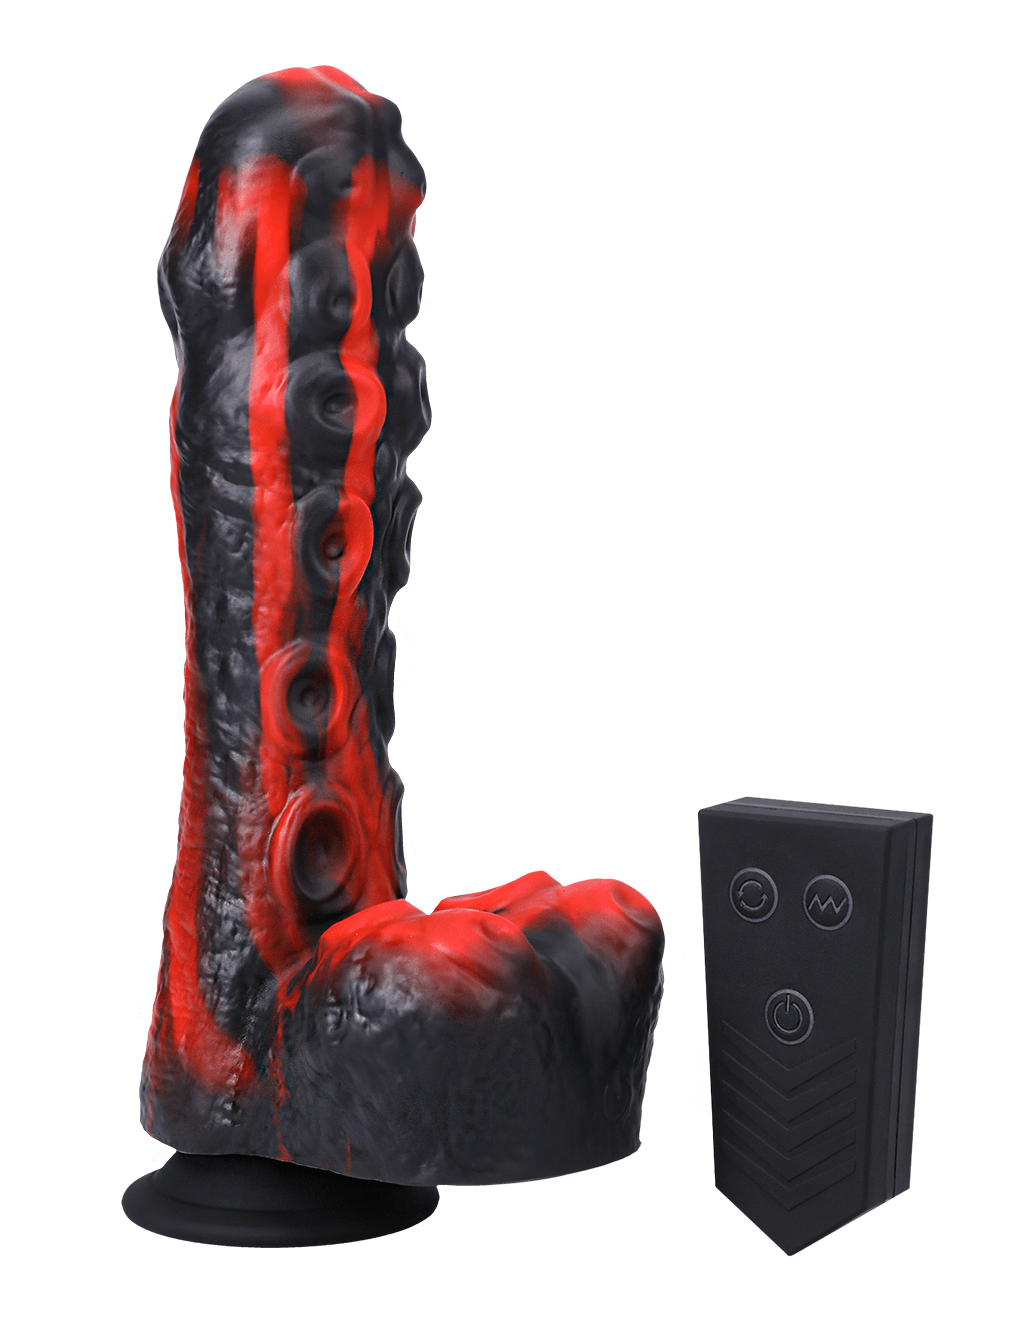 Fort Troff Tendril Thruster - Red/Black - Product w/Remote